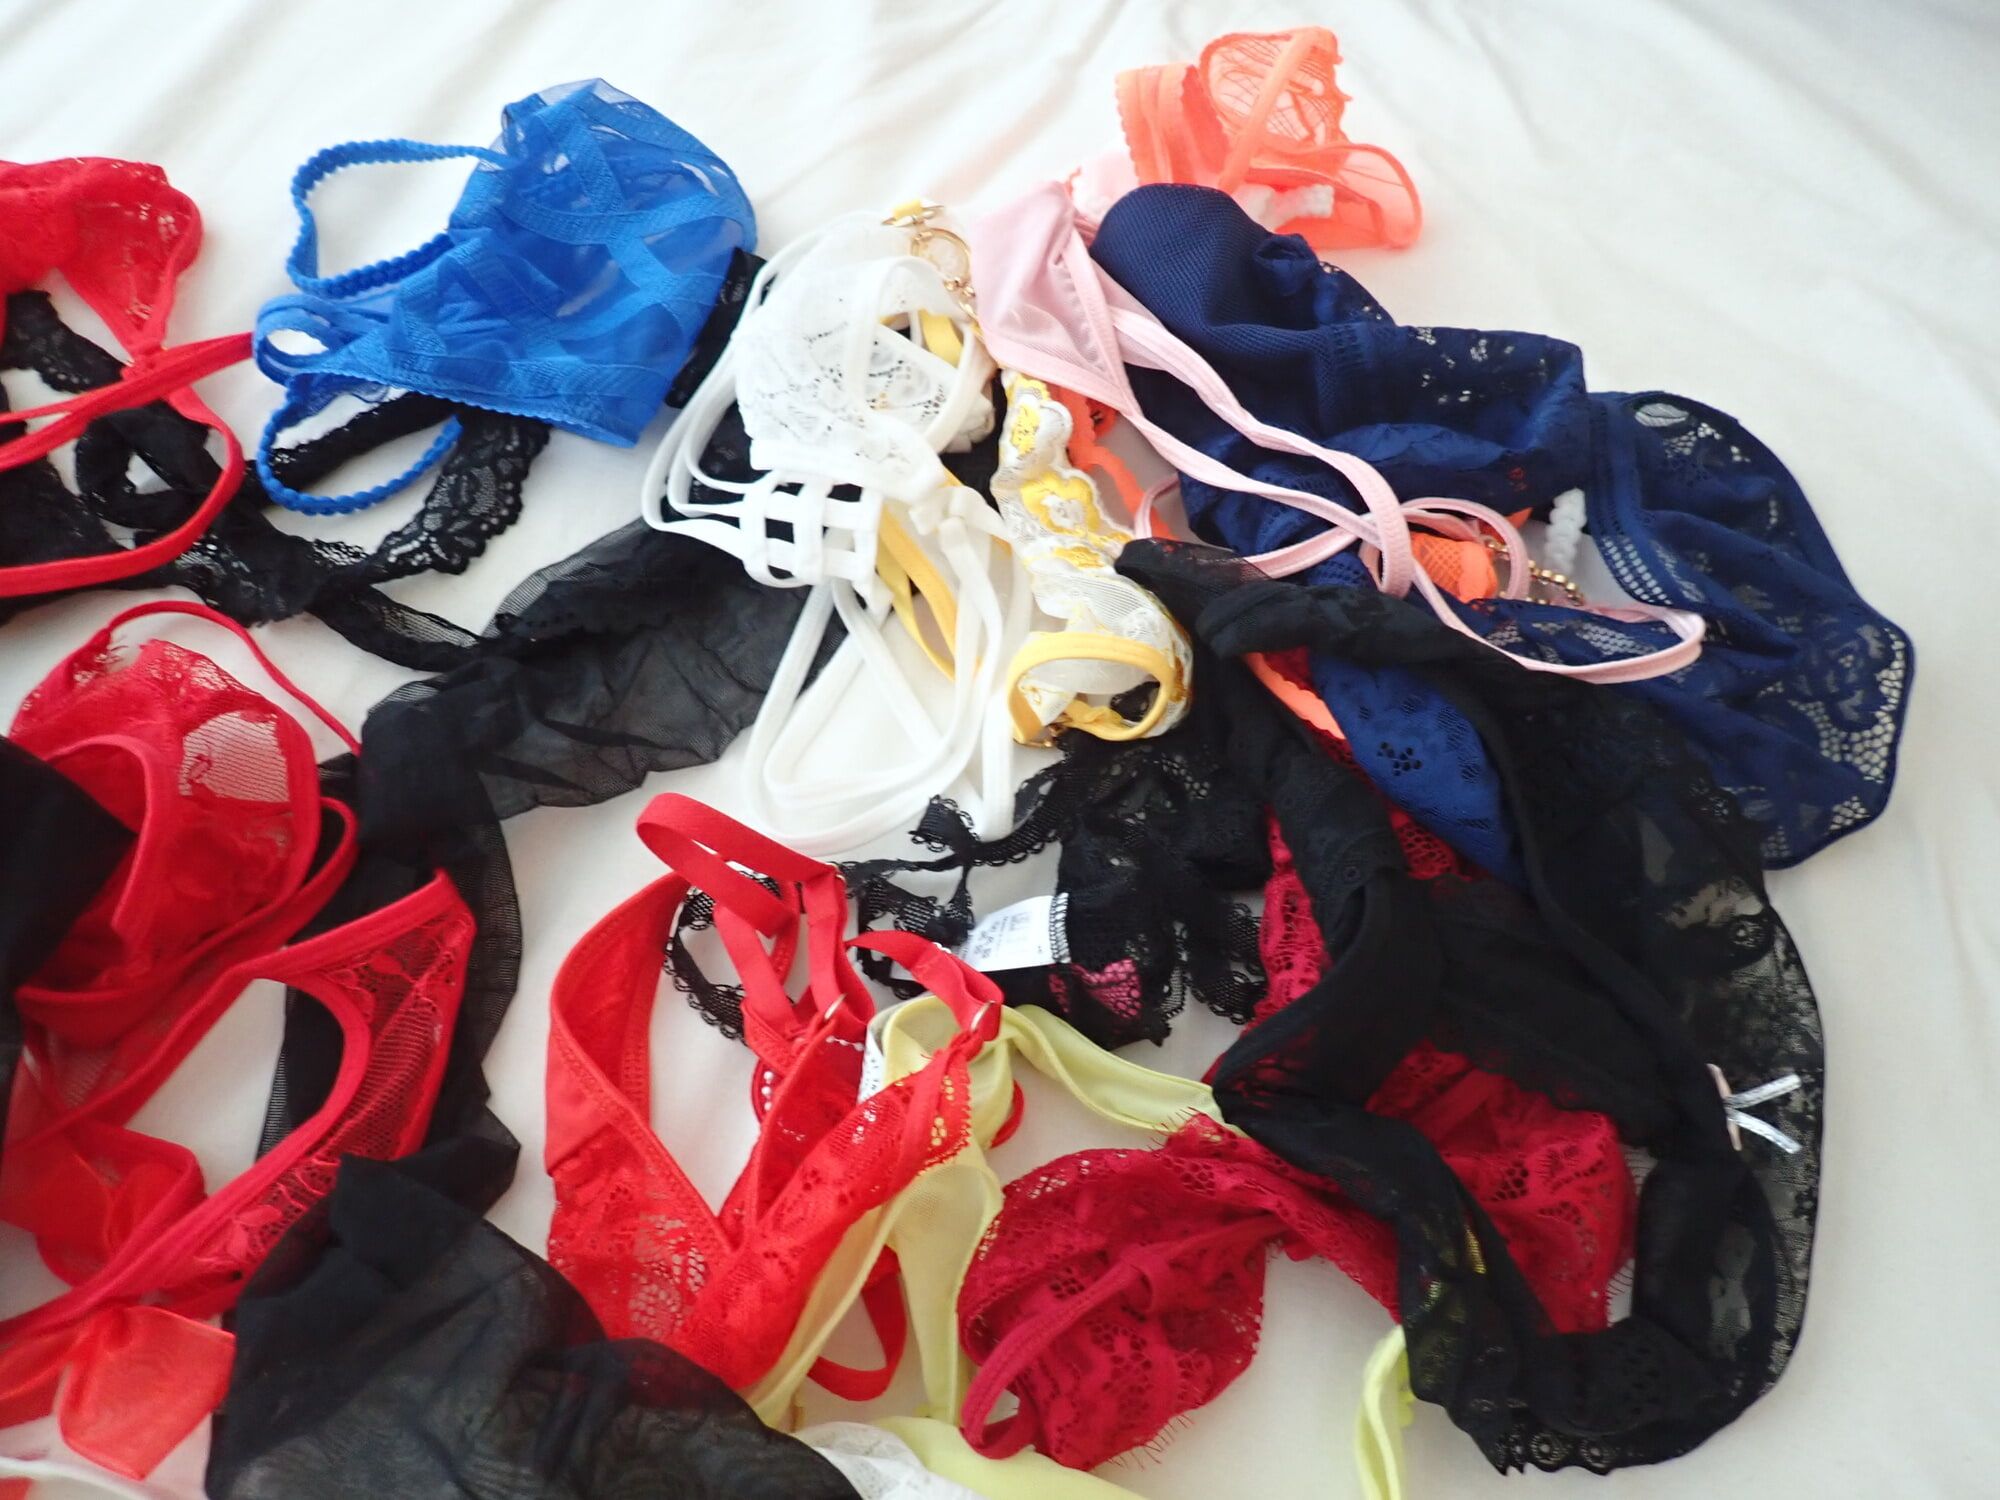 my knicker collection is getting bigger #6